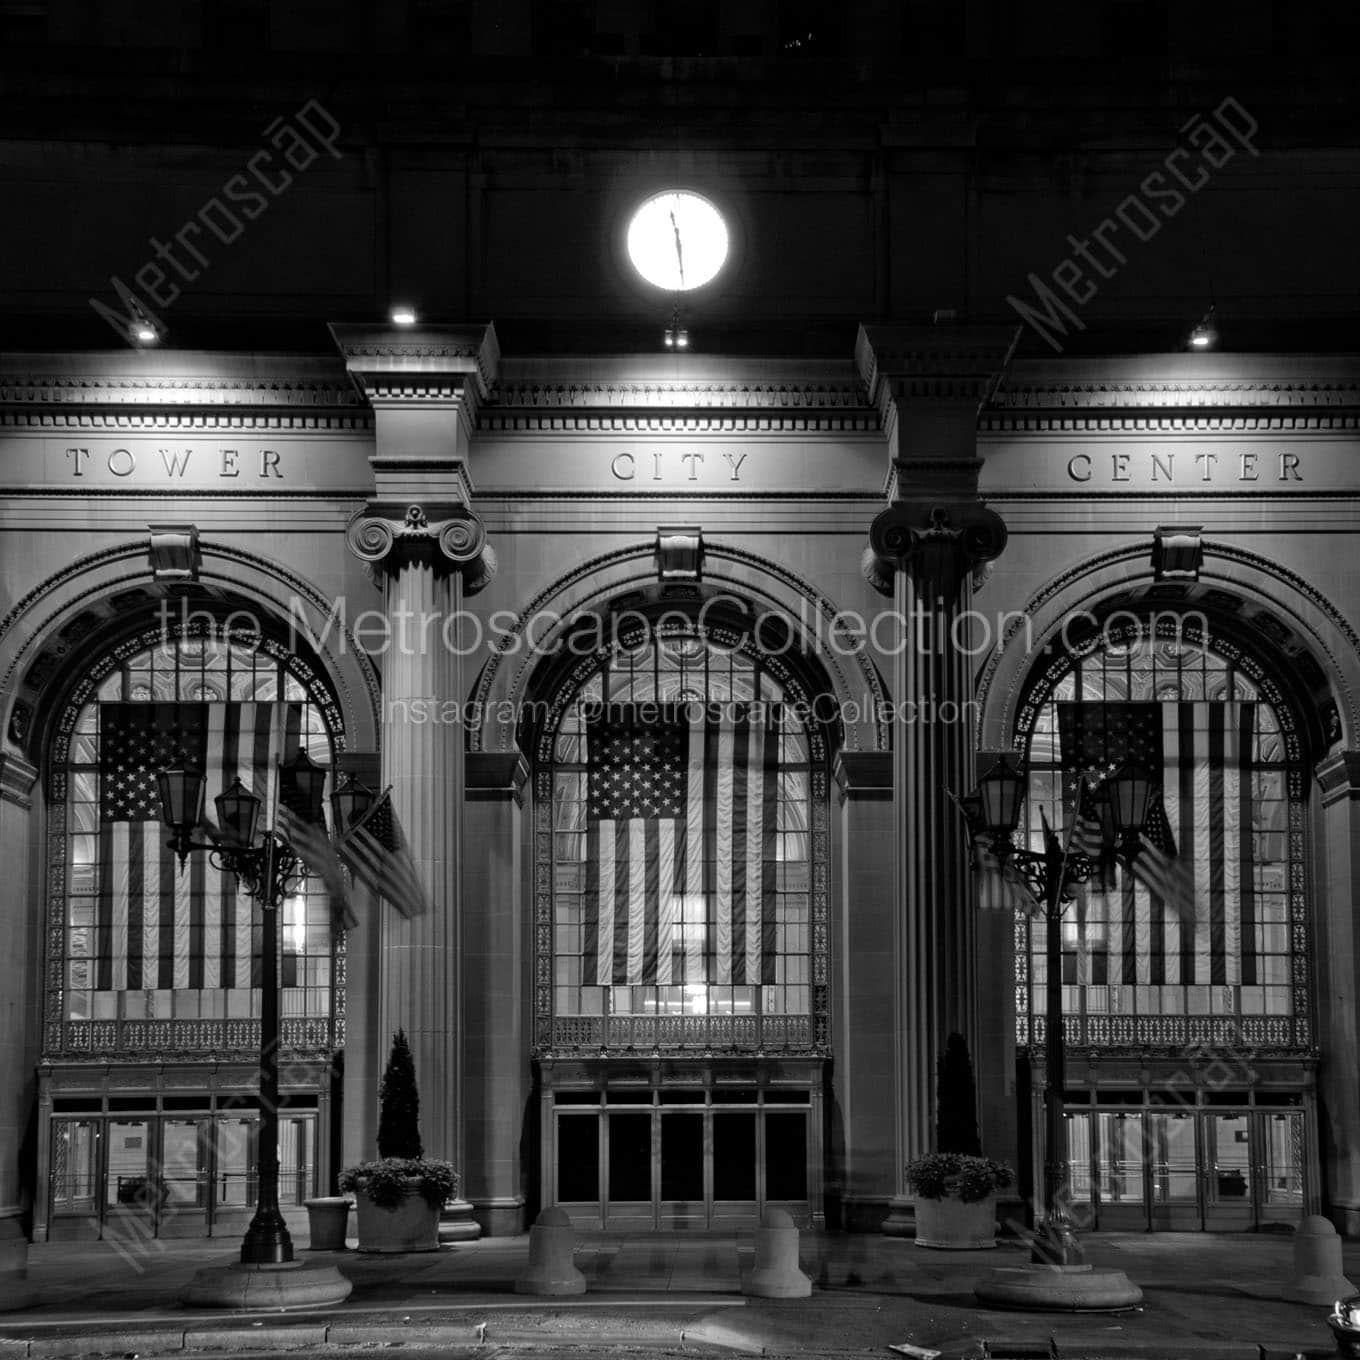 tower city center public square at night Black & White Office Art